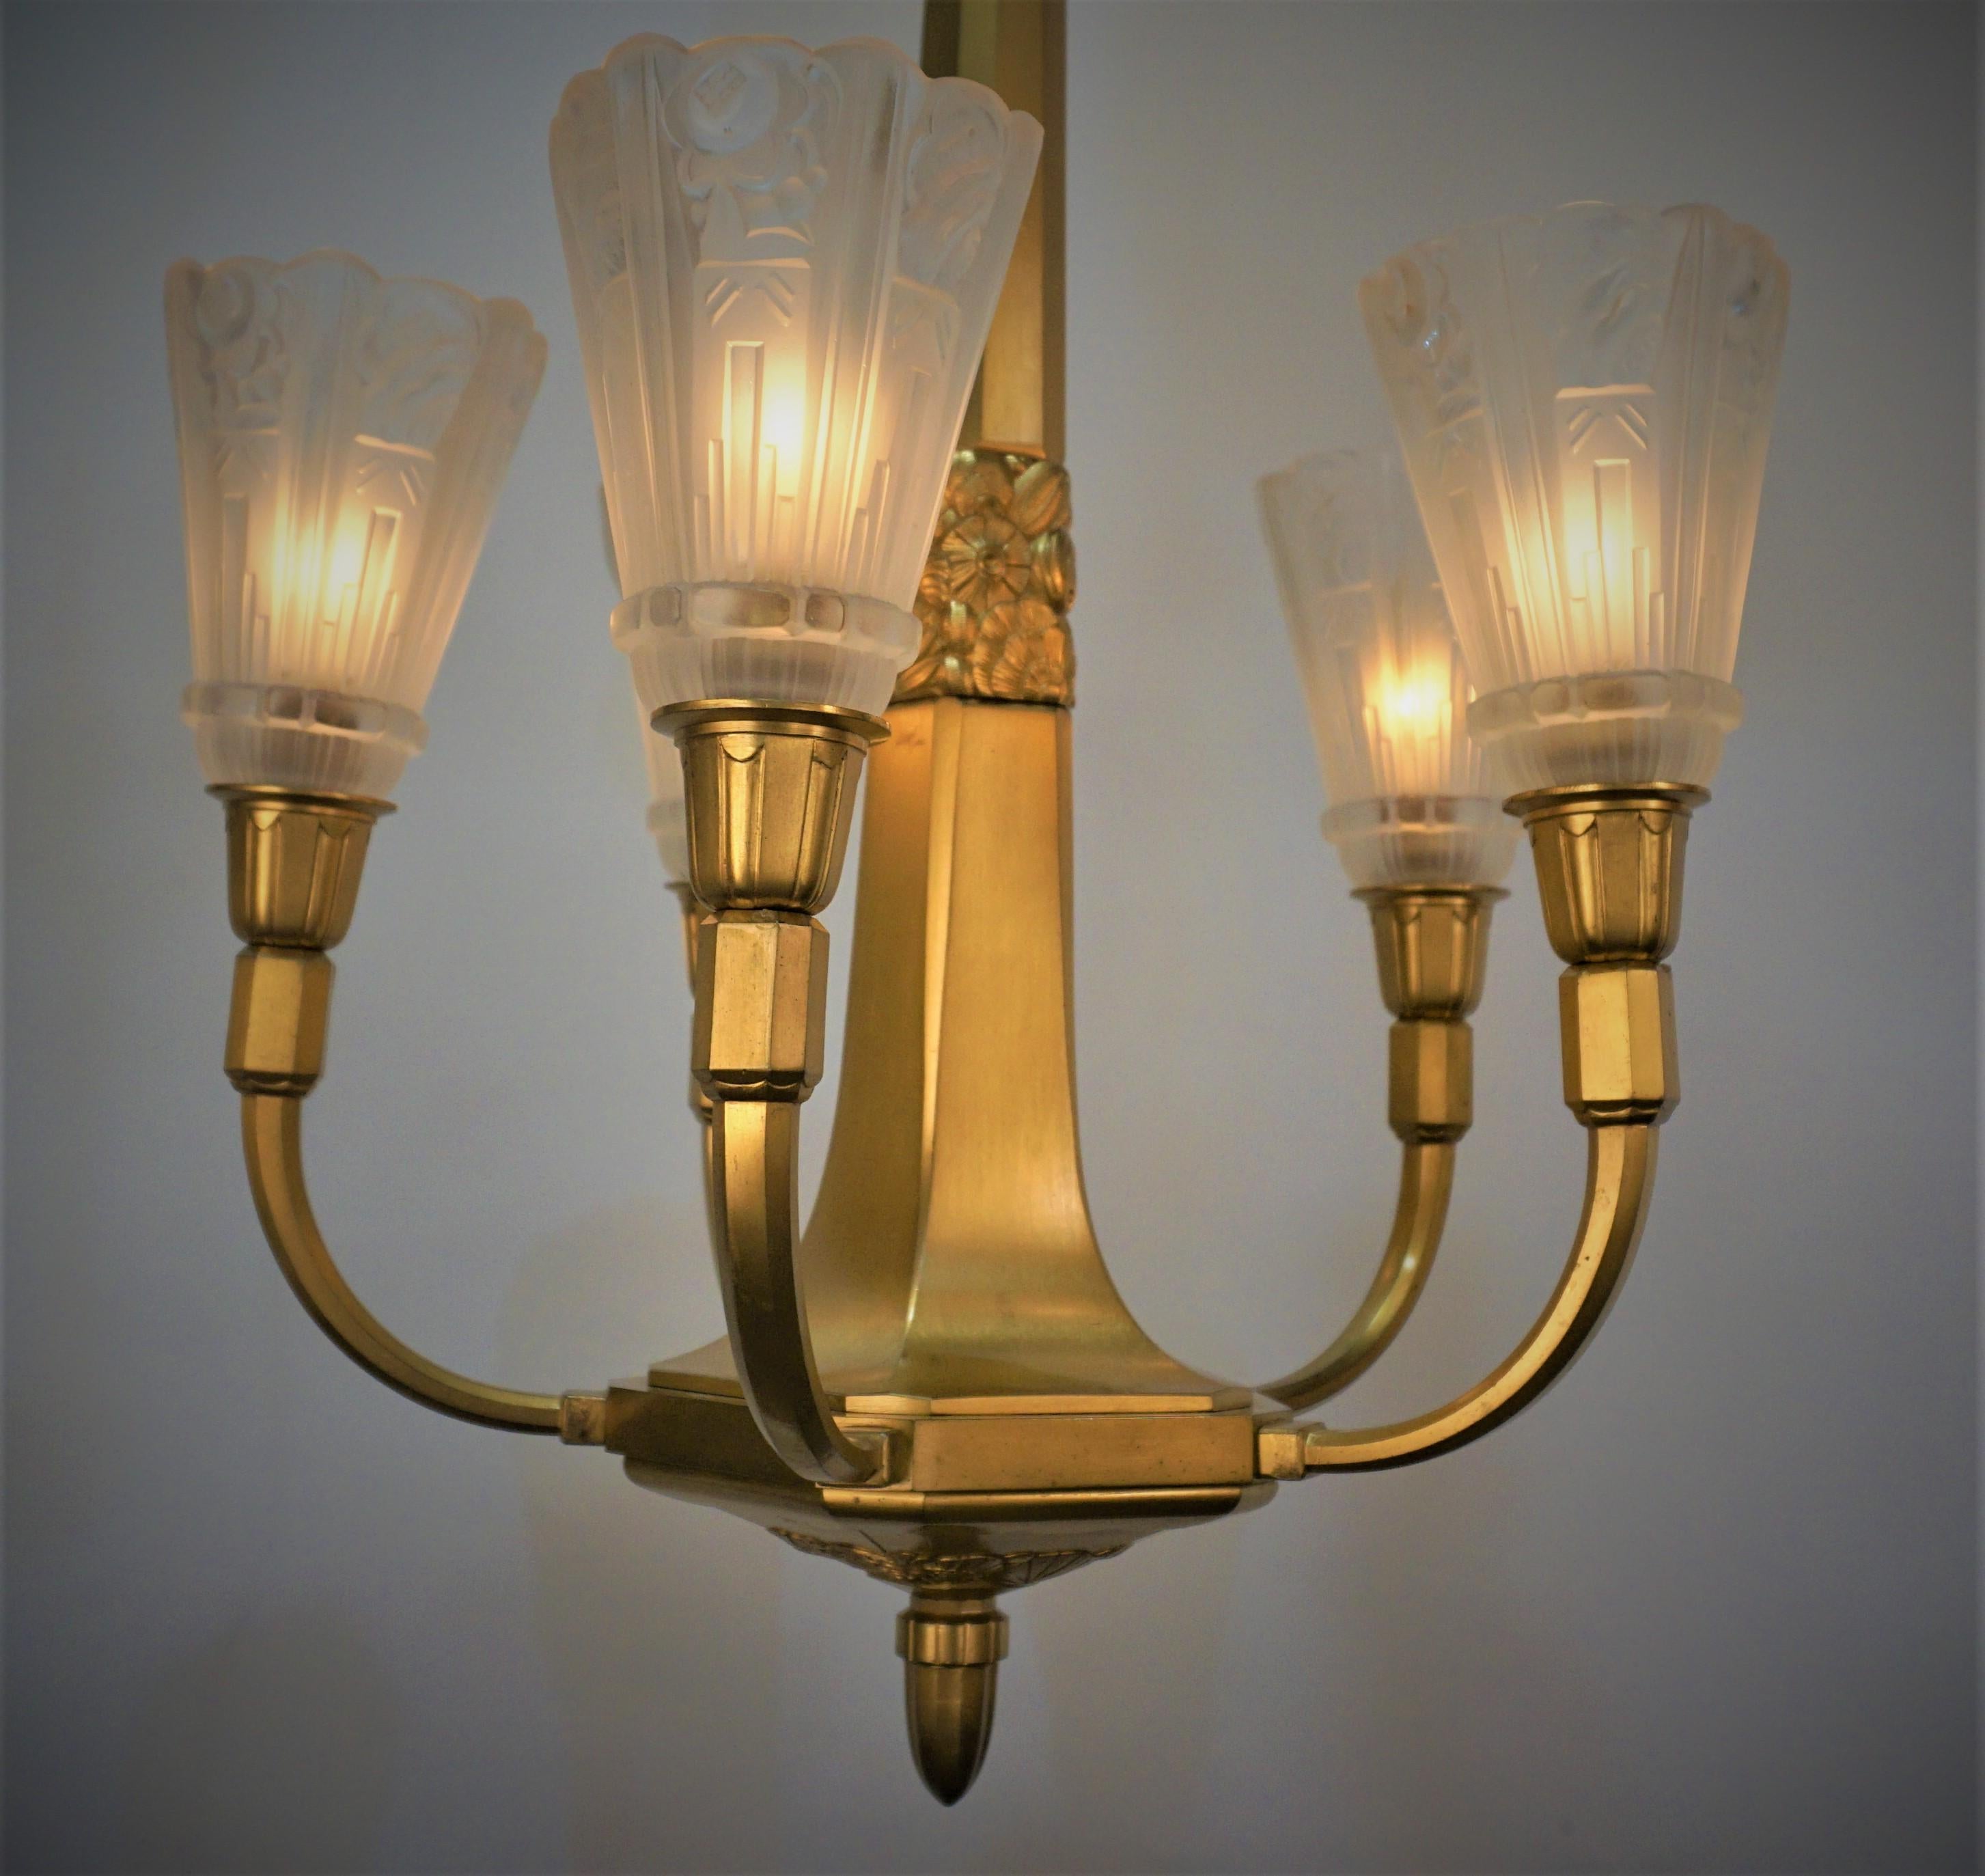 Stunning French Art Deco five light clear frost glass chandelier signed by J Robert. Great cast gilt bronze frame.
Professionally rewired and ready for installation.